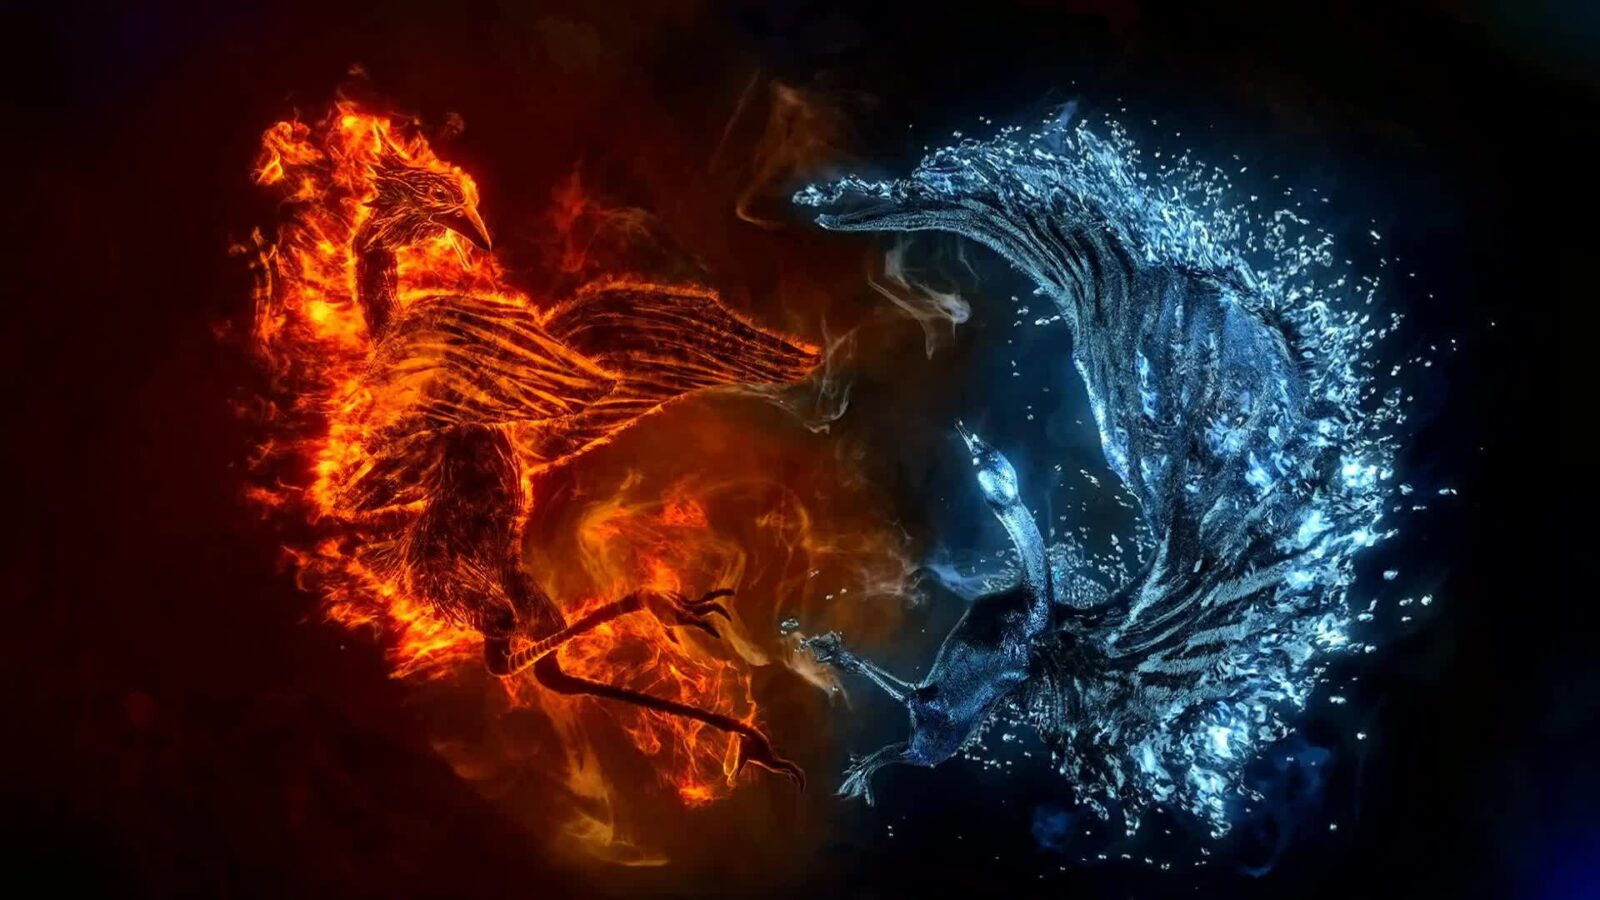 Ice And Flame Abstract Fantasy Artwork - Desktop Animated Wallpaper